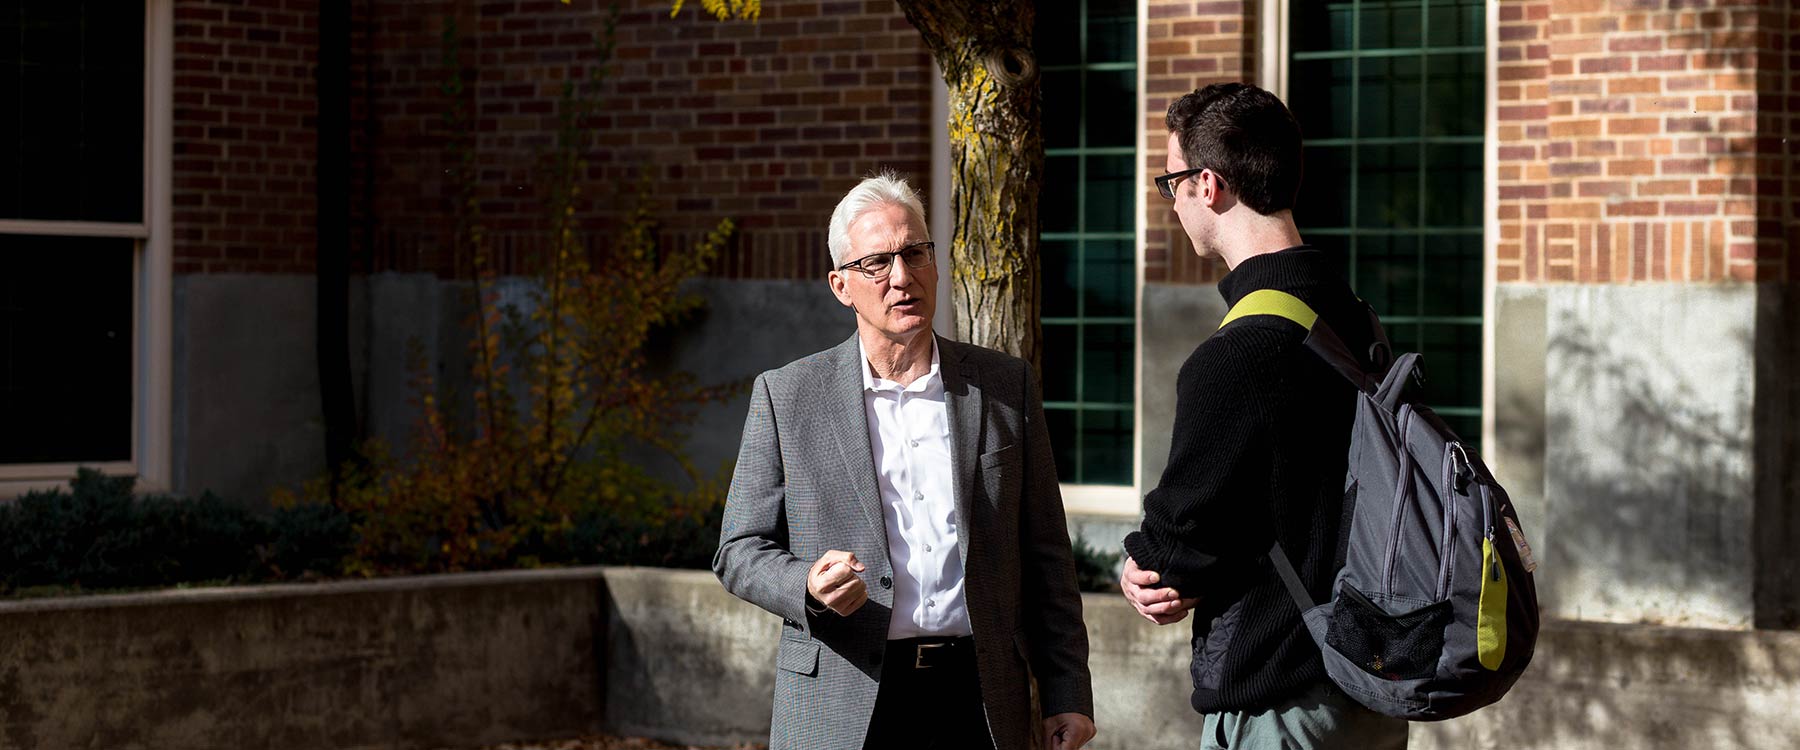 Professor Randall Michaelis stands and speaks with a student somewhere outside the library.